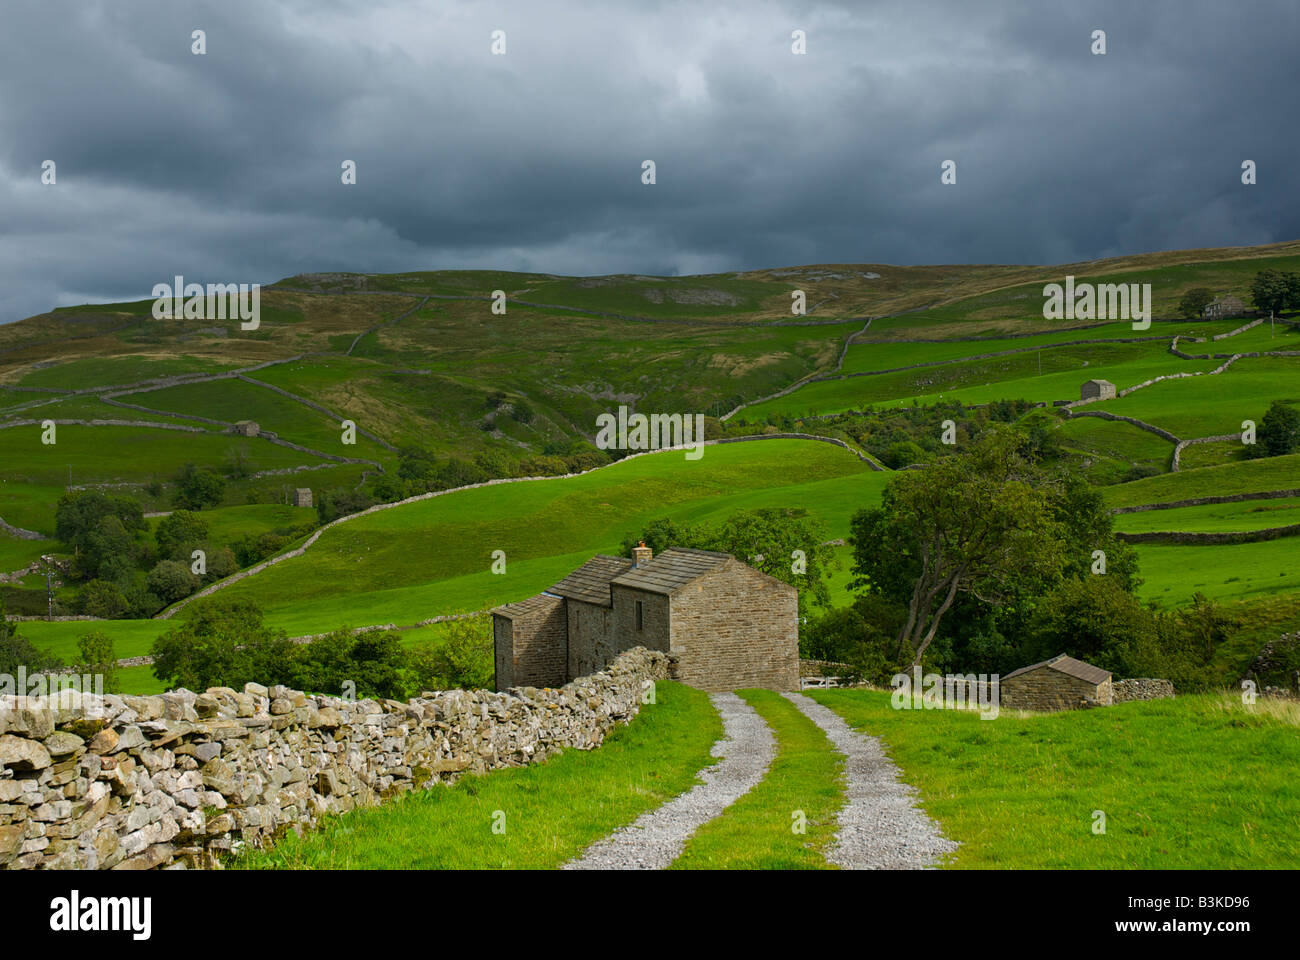 High Oxnop Farm, Oxnop Gill, Swaledale, Yorkshire Dales National Park, England UK Stock Photo